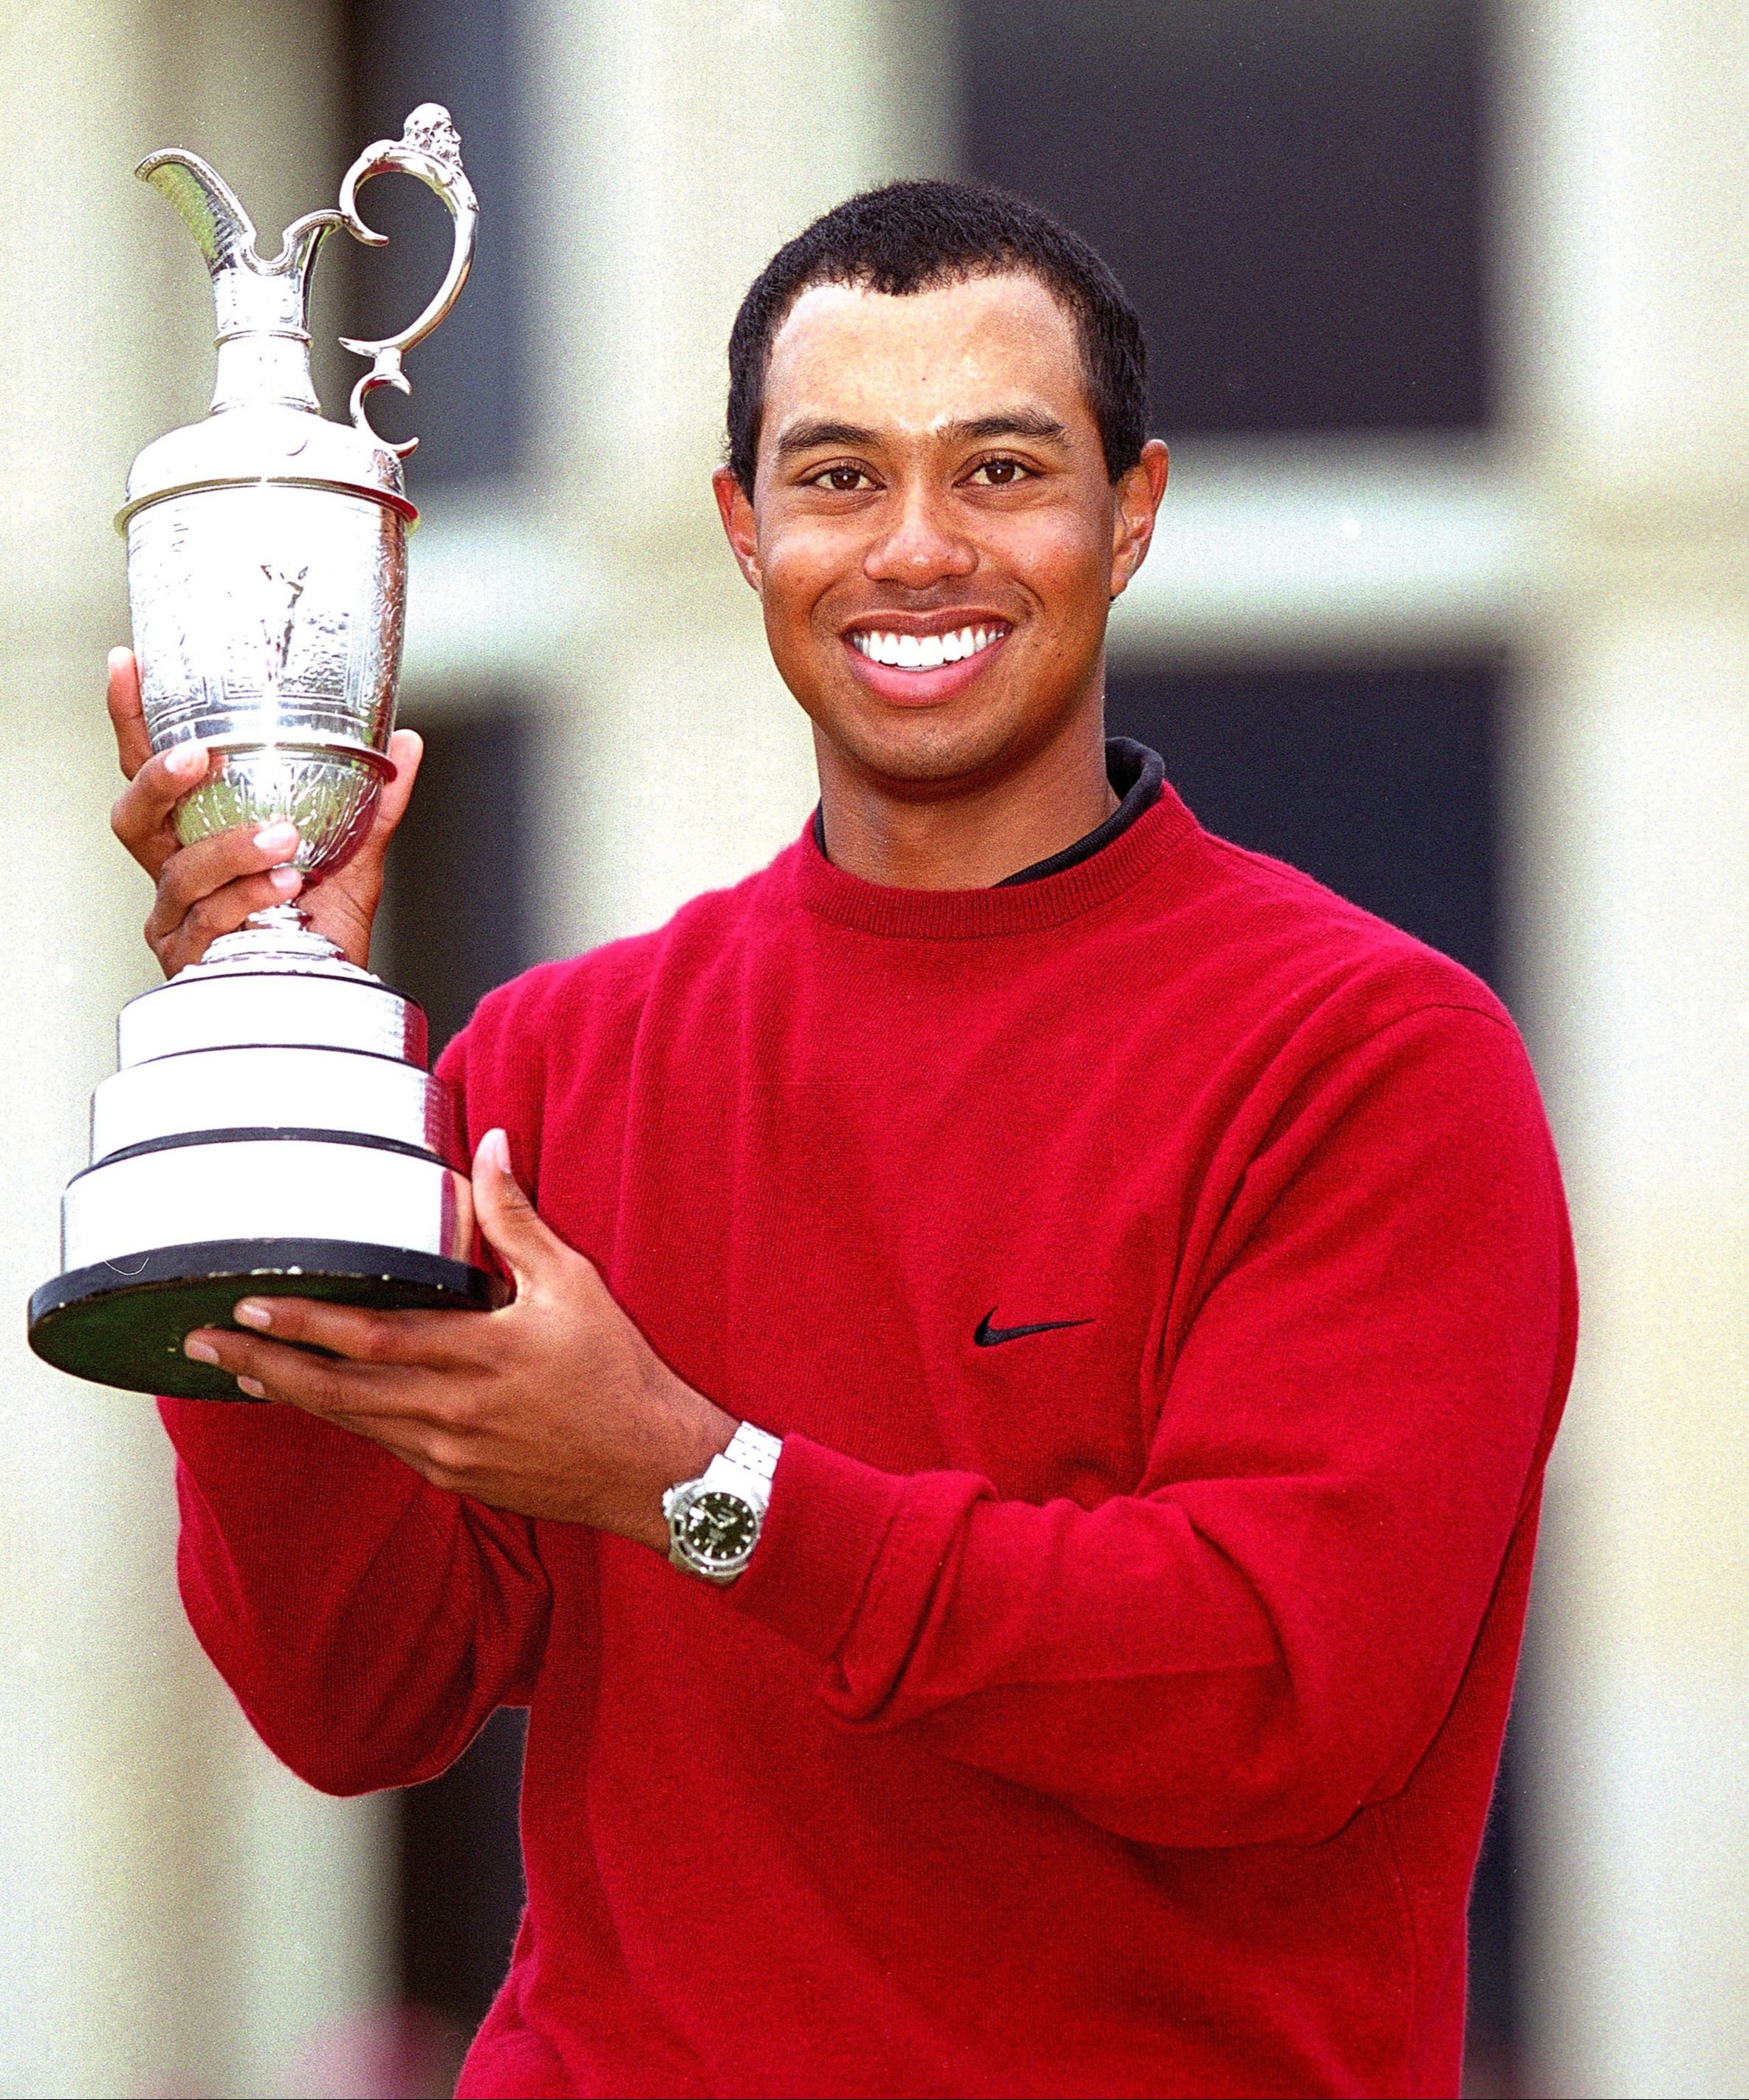 Rankin was with Tiger Woods' group during his 2000 Open Championship win. (Andrew Redington /Allsport)